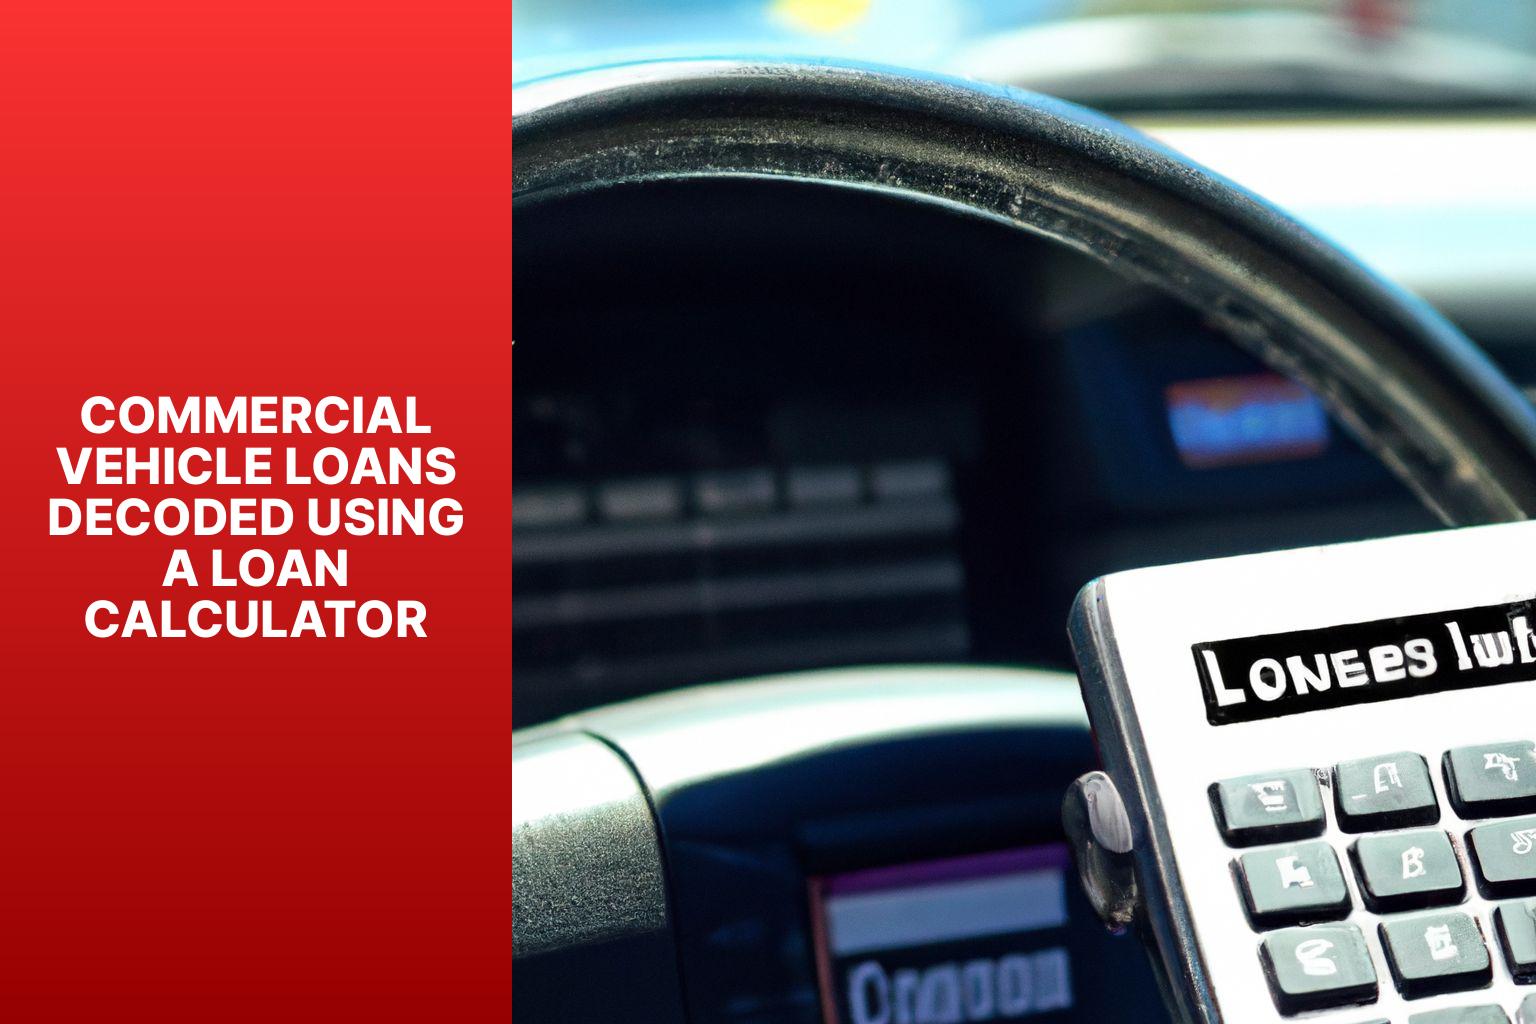 Commercial Vehicle Loans Decoded Using a Loan Calculator